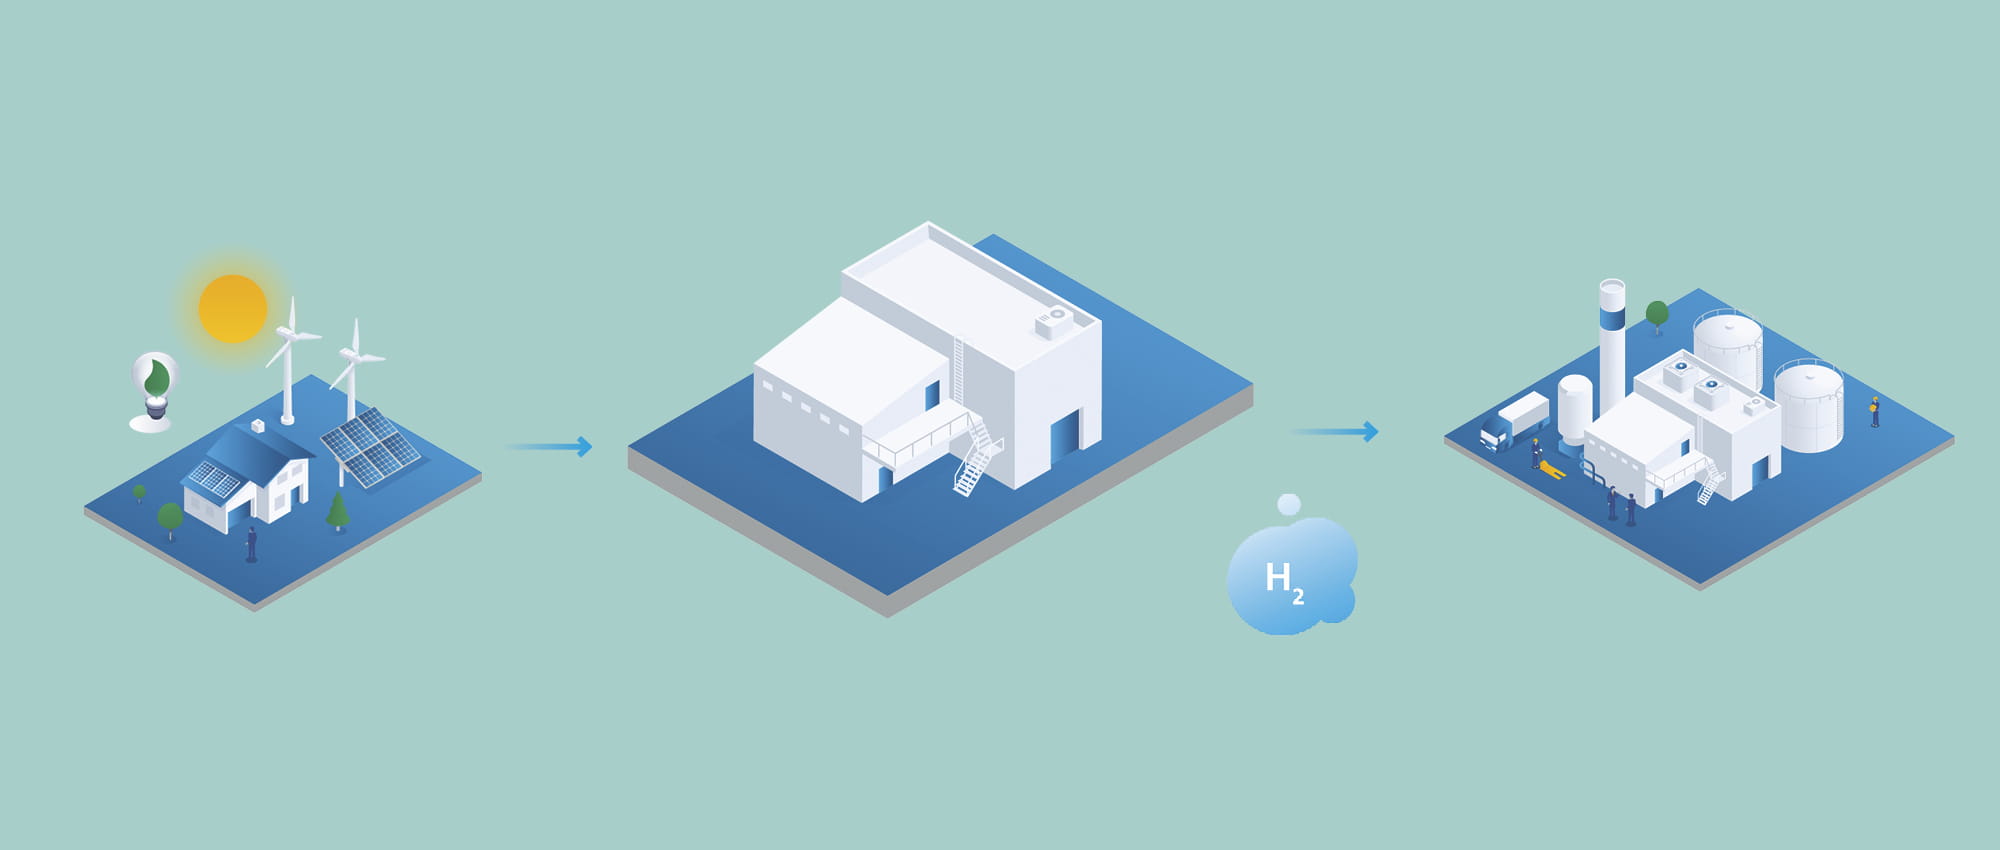 Illustration of a wind turbine on the left, an electrolysis center in the middle, and a factory on the right.